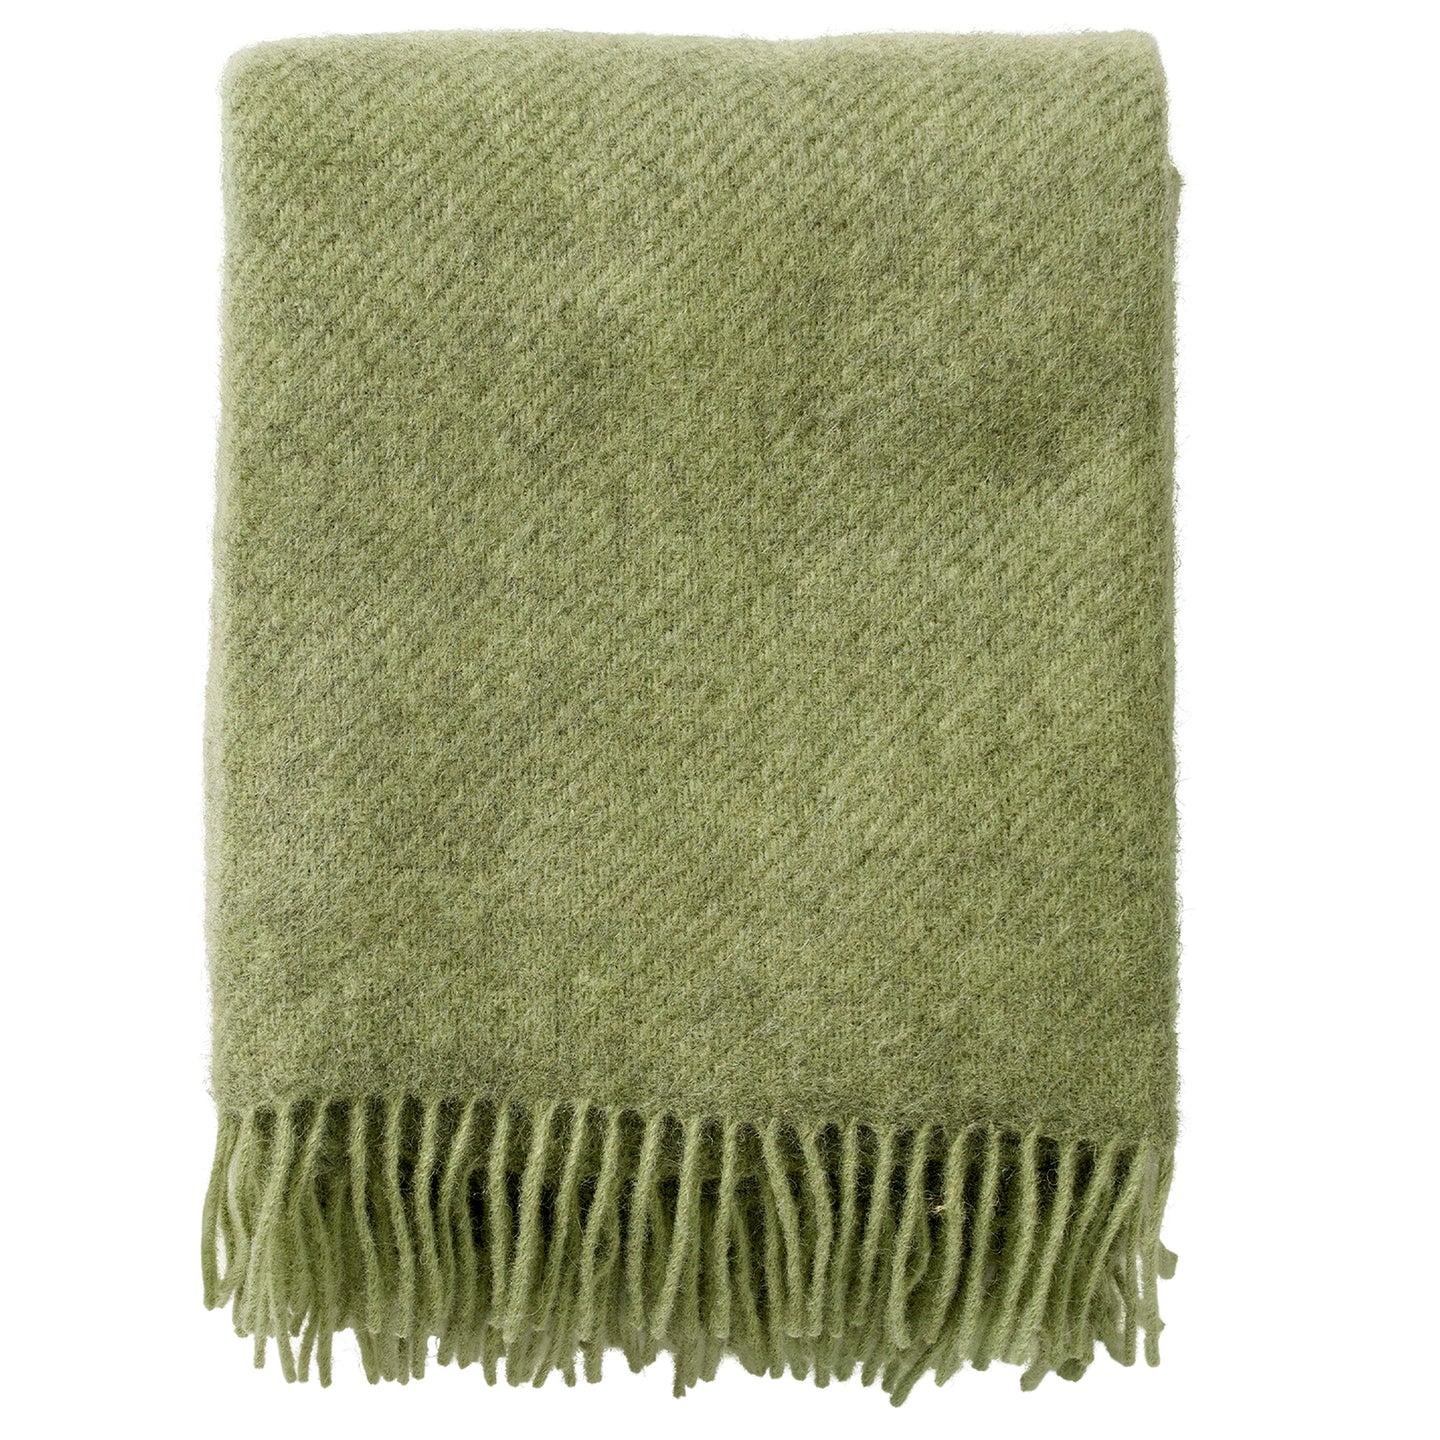 Gotland Pear Brushed Gotland & Lambswool Throw